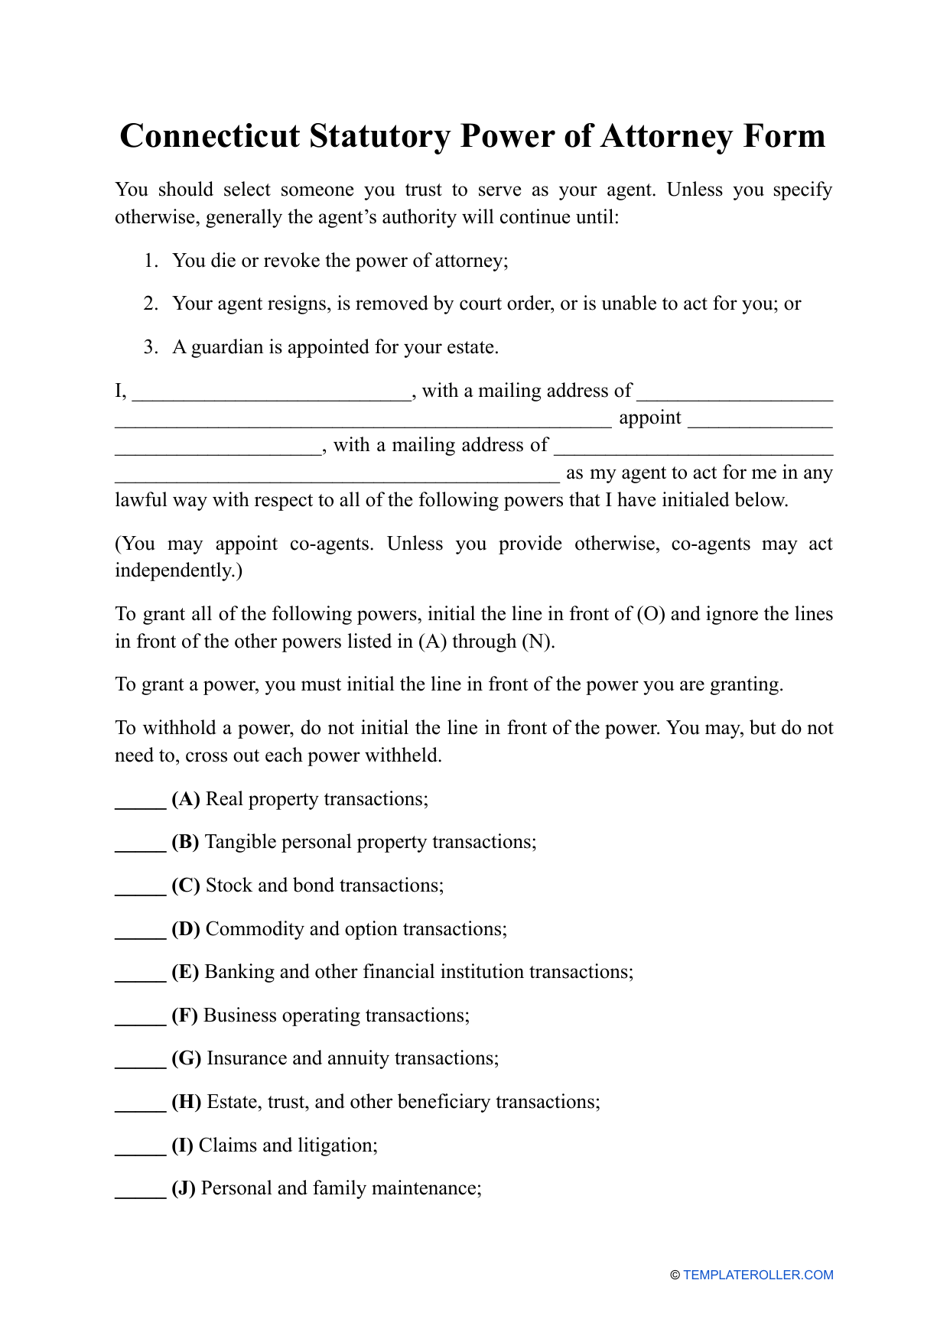 Statutory Power of Attorney Form - Connecticut, Page 1